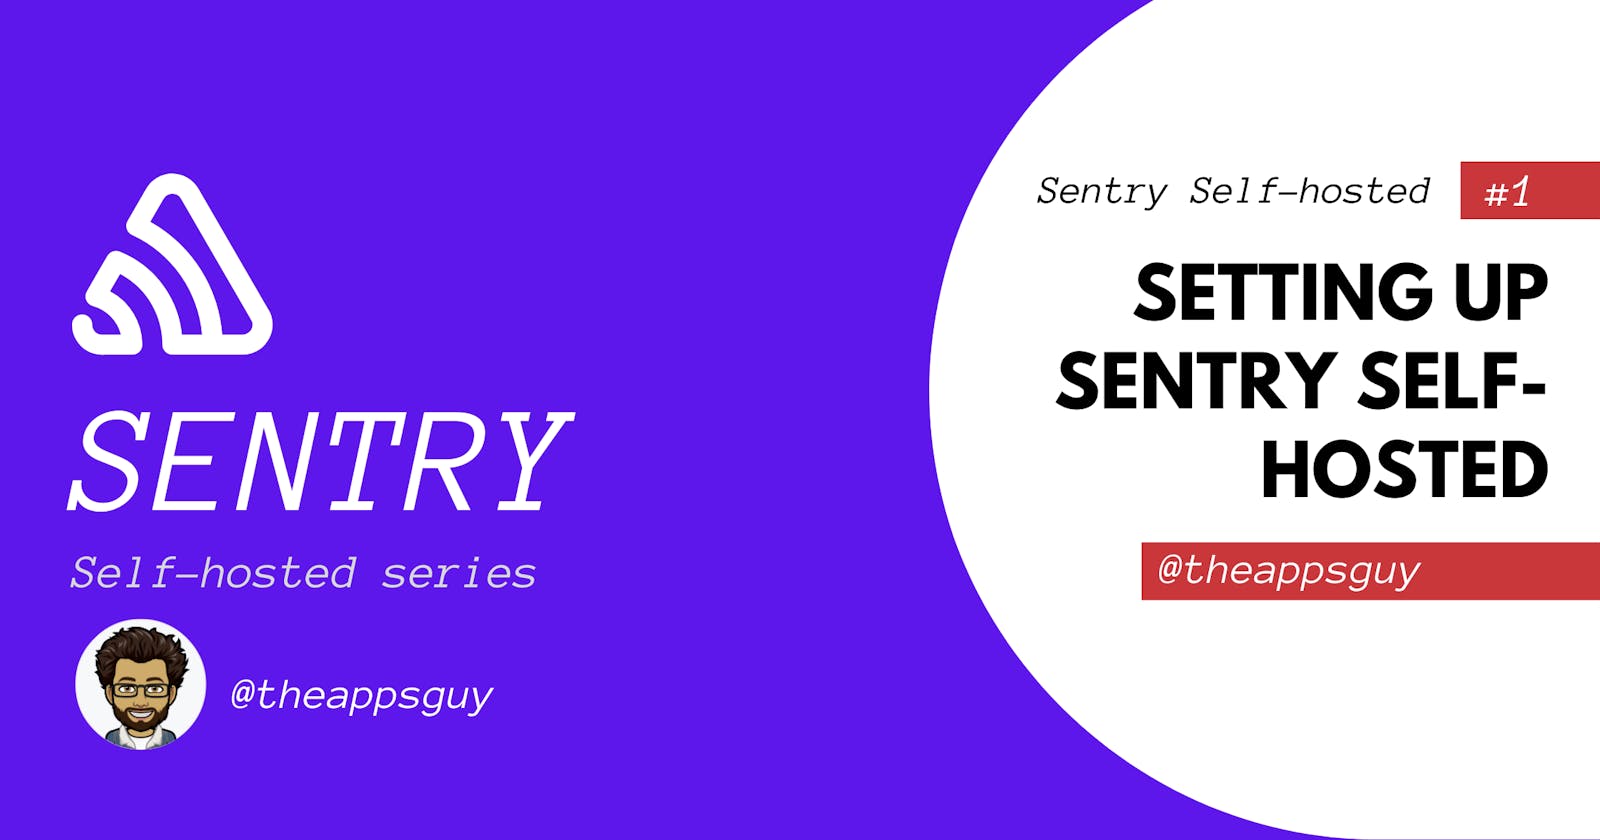 Setting up Sentry self-hosted